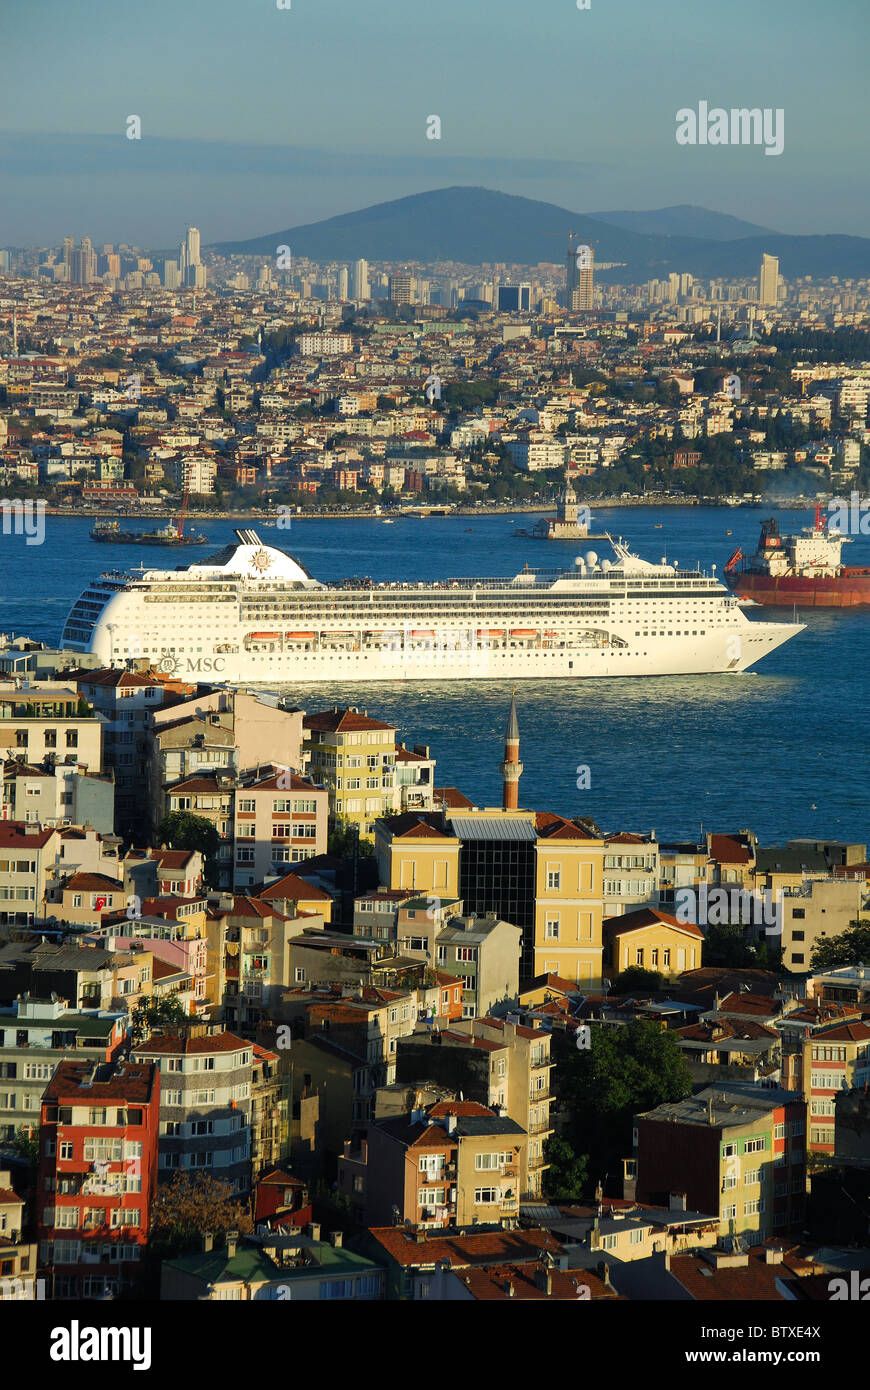 ISTANBUL, TURKEY. A view from Beyoglu over the Bosphorus, with the cruise ship MSC Opera departing for the Sea of Marmara. 2010. Stock Photo